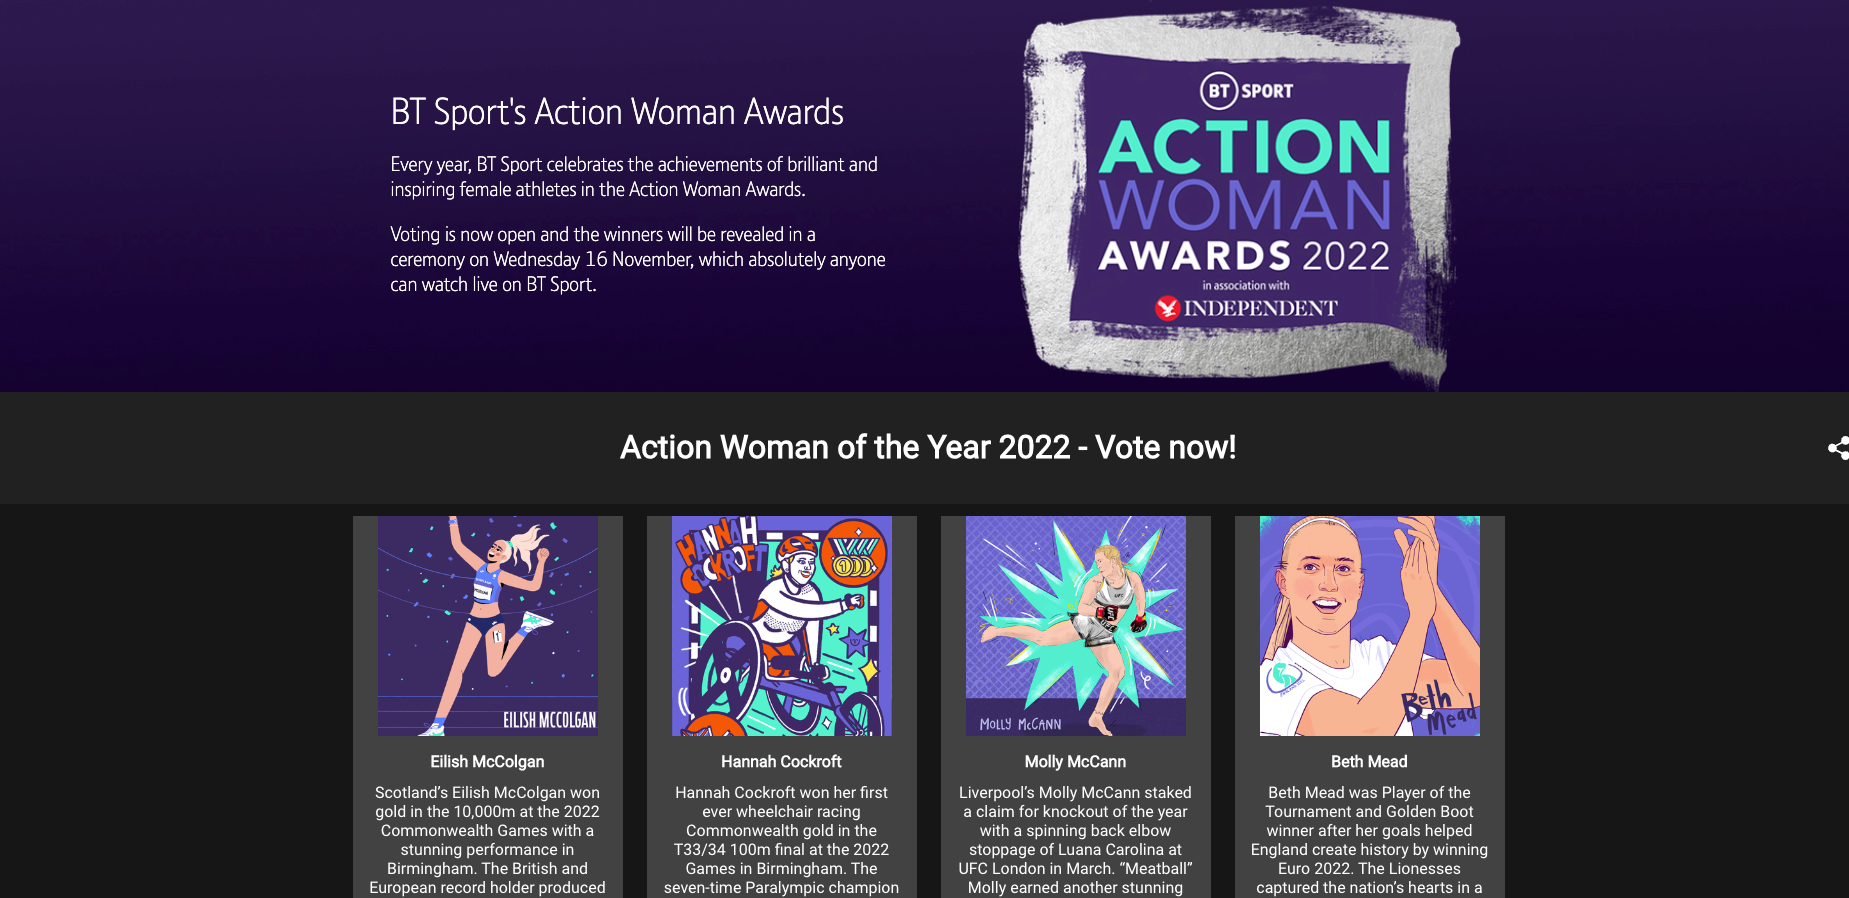 Have your say in the BT Sport’s Action Woman Awards by voting here